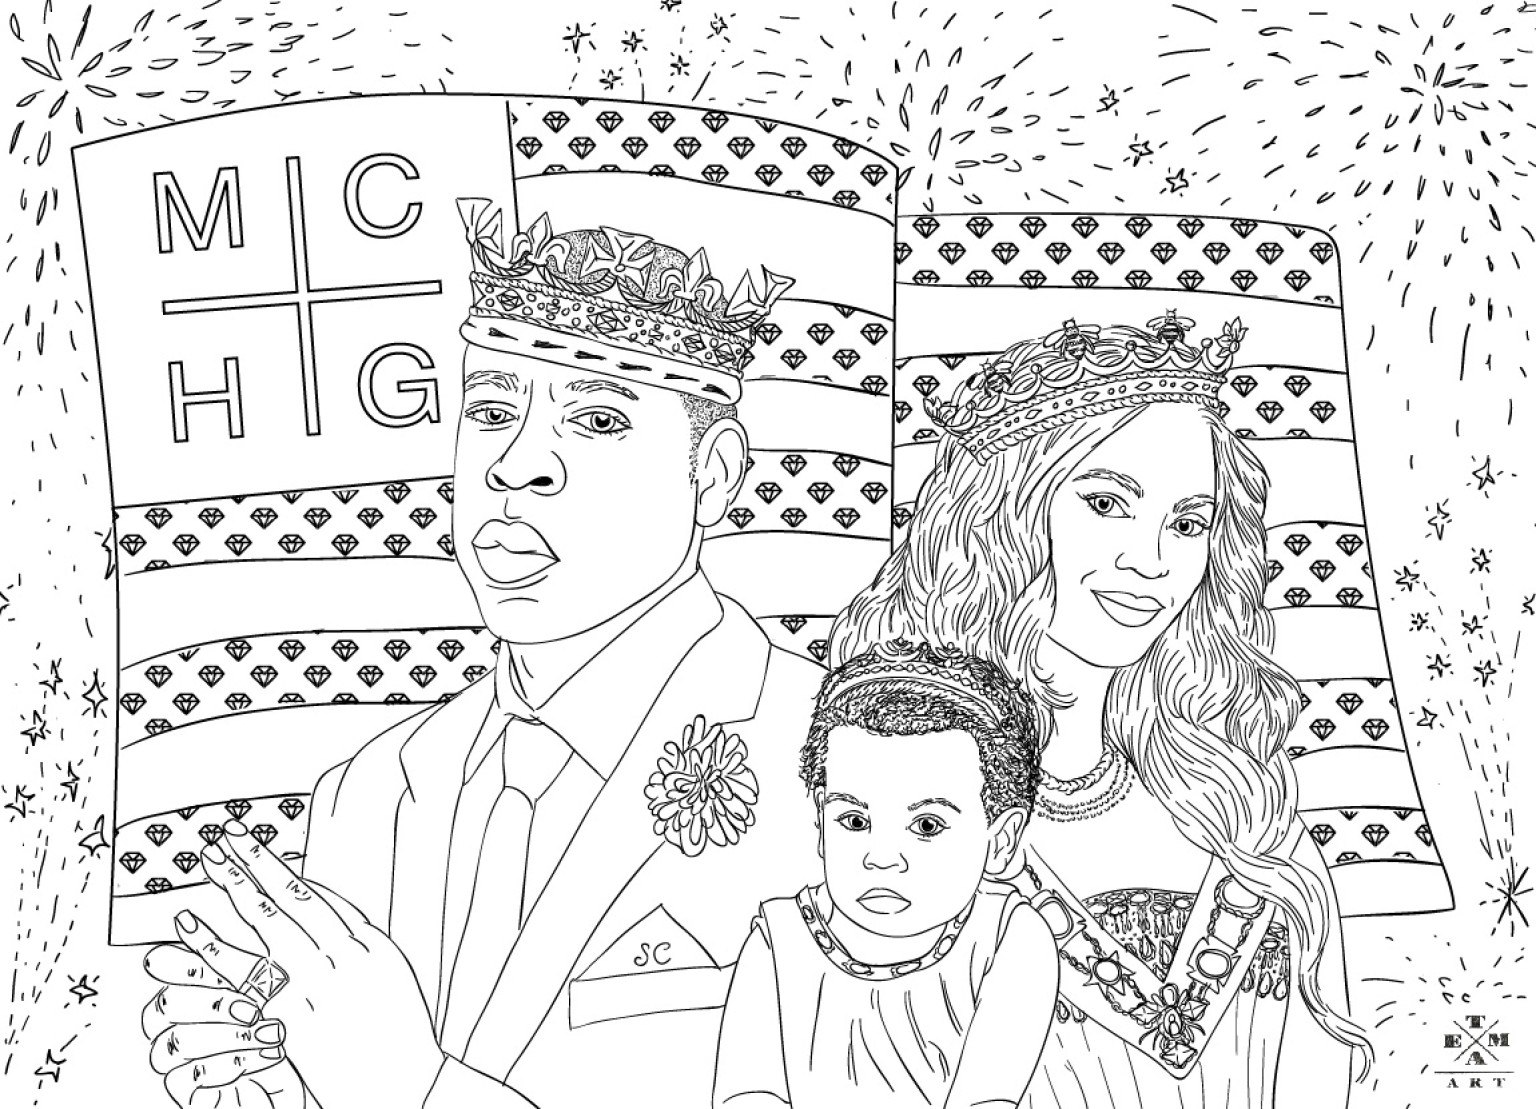 beyonce coloring book illustrator beautifully recreates iconic scenes from coloring book beyonce 